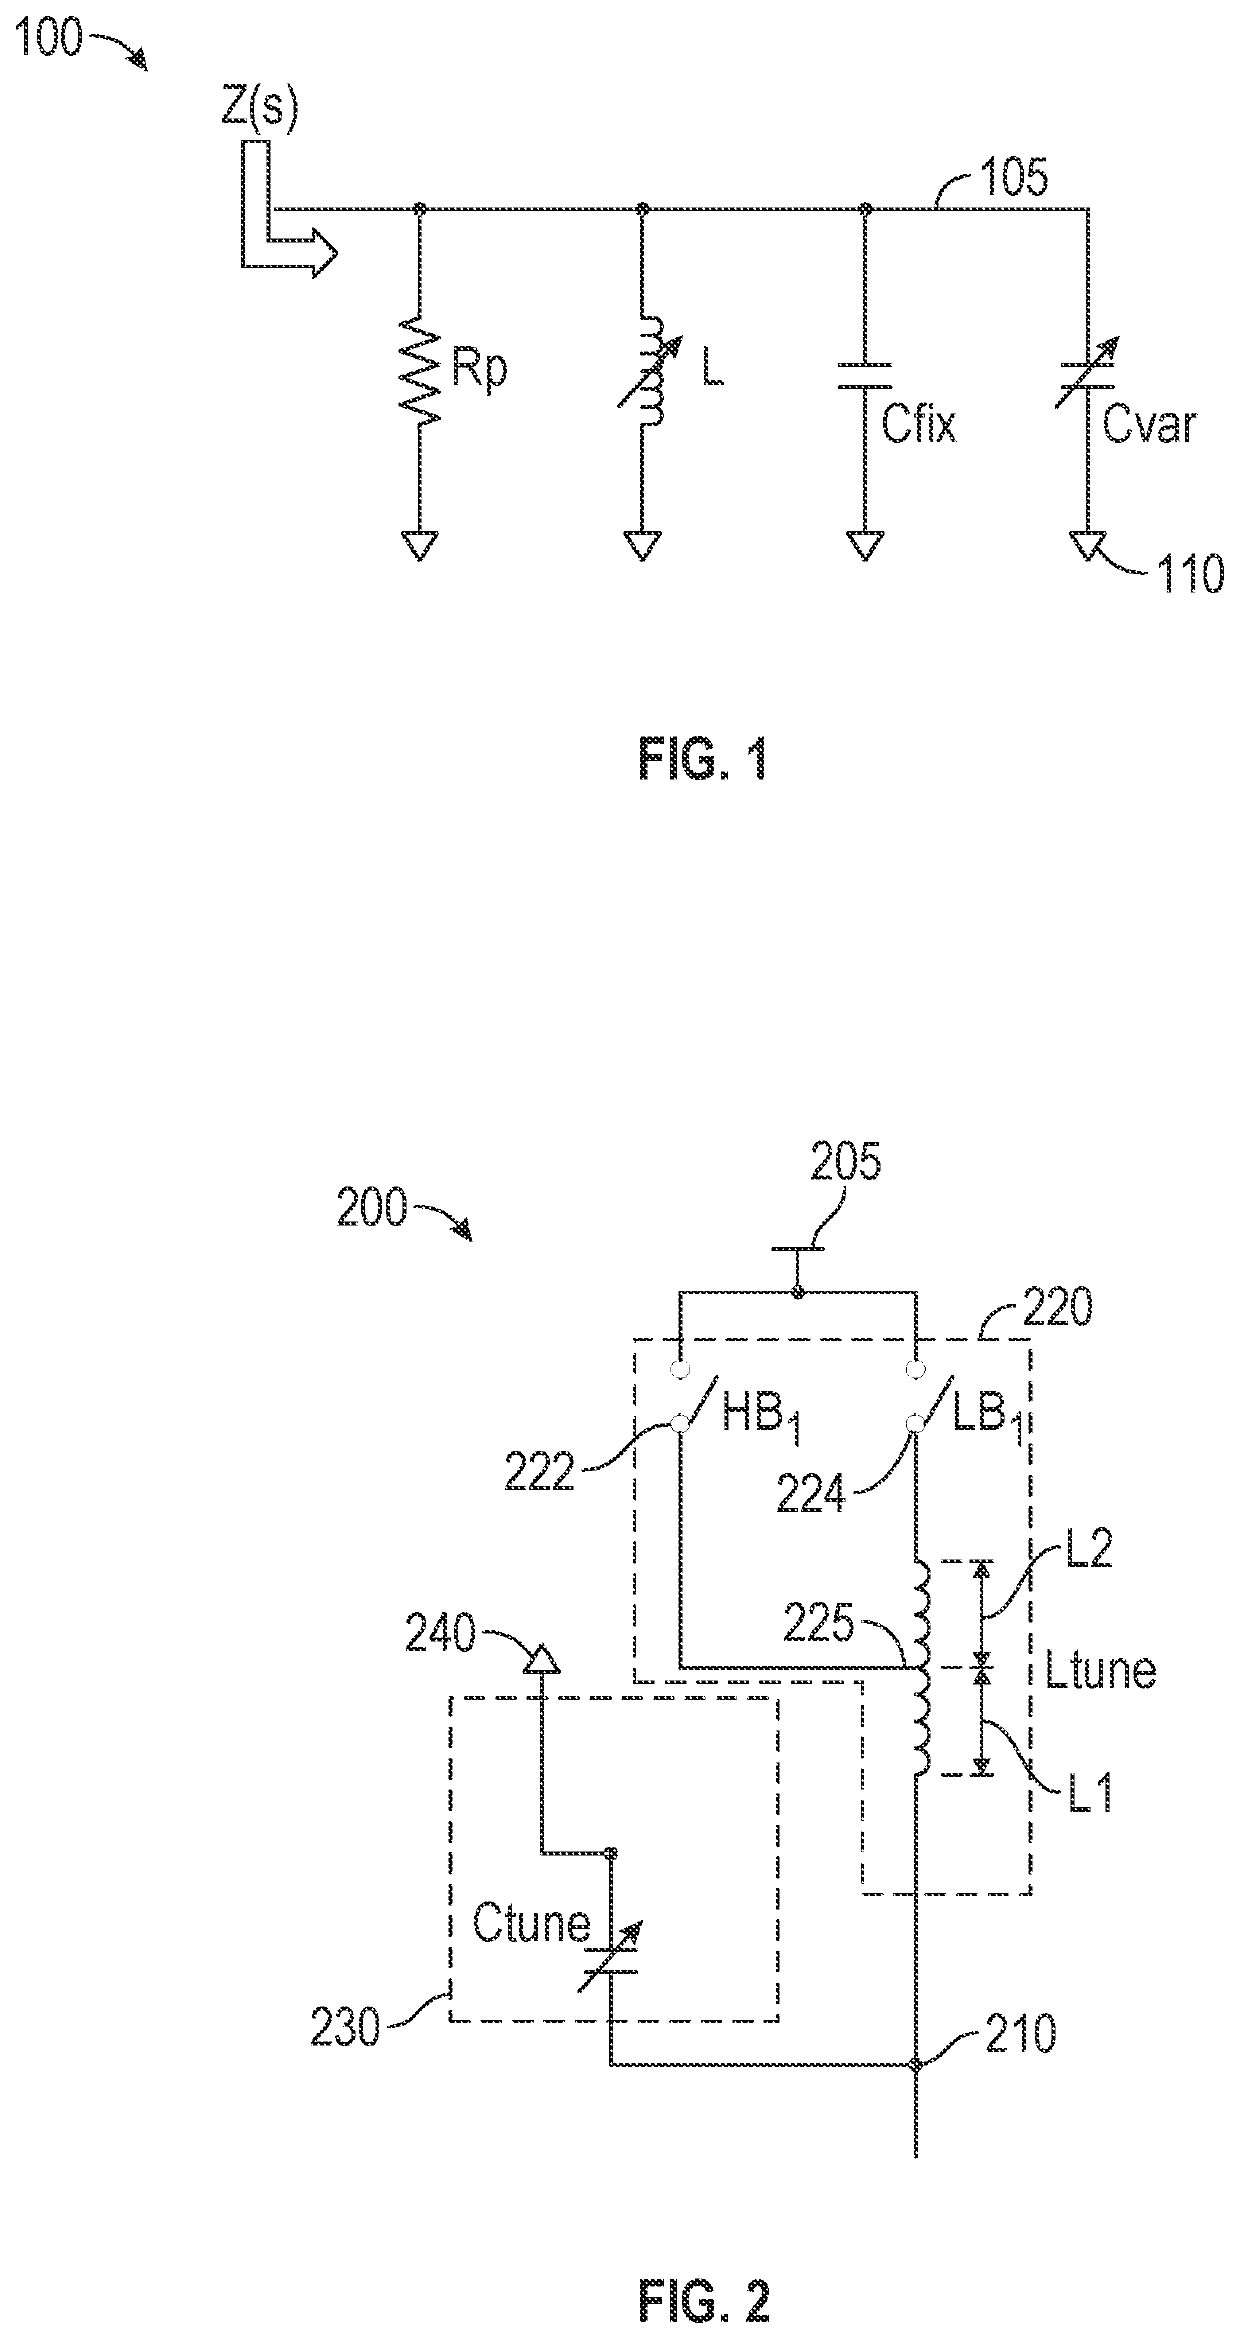 Providing a programmable inductor to enable wide tuning range